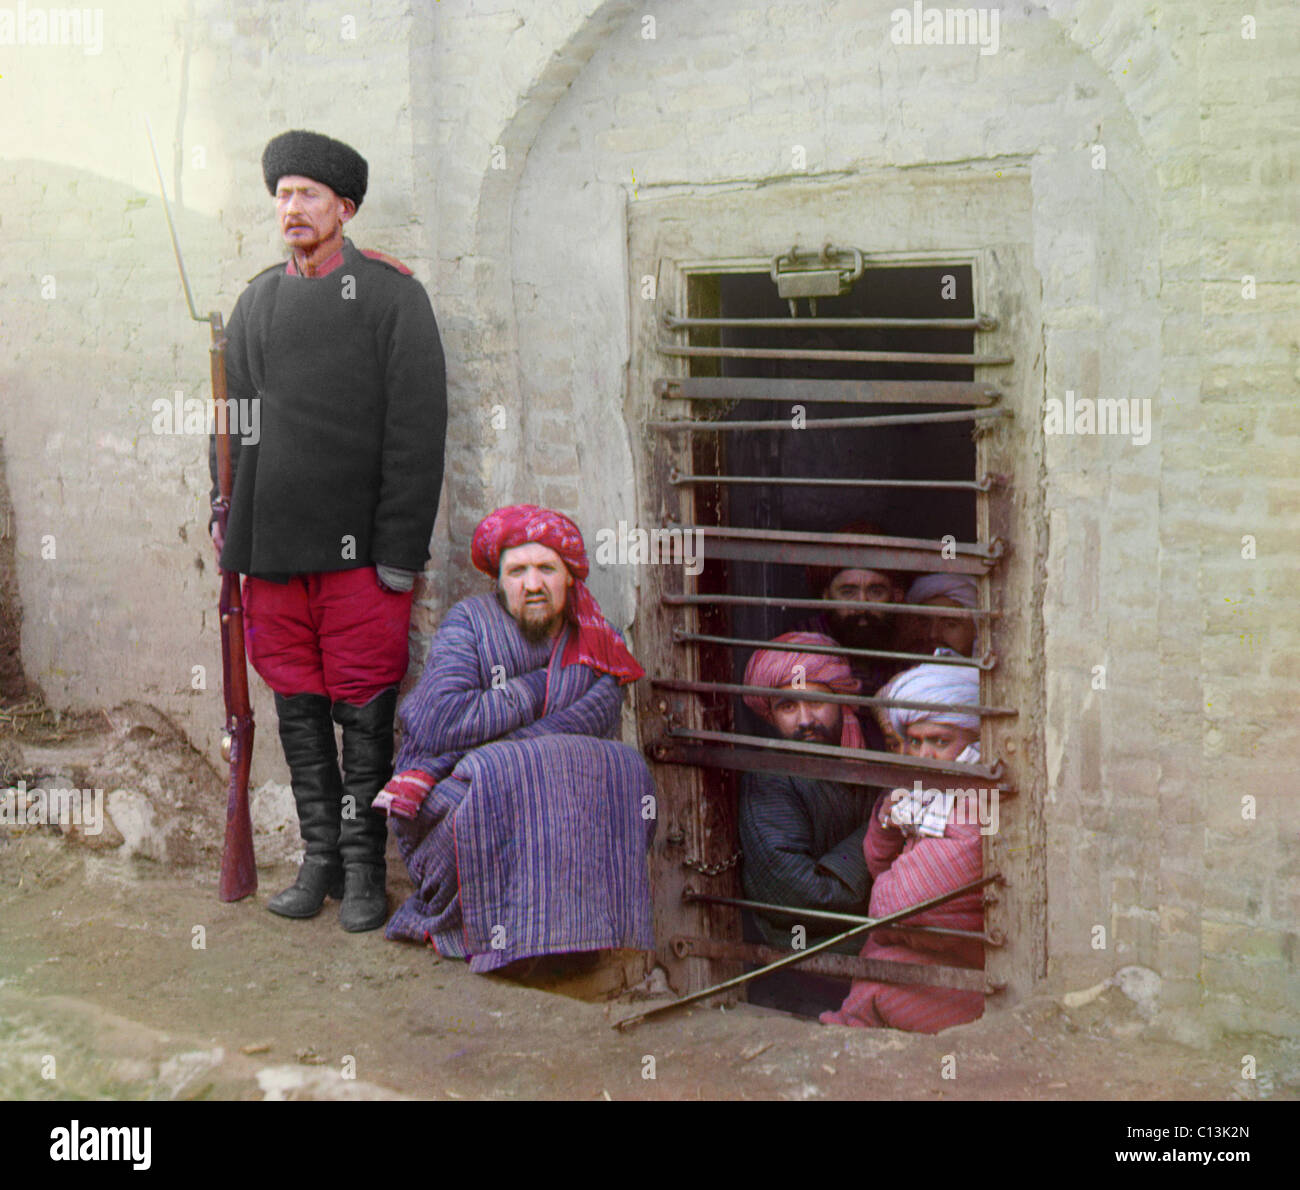 Traditional Central Asian prison, with cells cut into the ground. Turbaned Inmates looking out through the bars while guard stands by with a Russian rifle, uniform, and boots. Russian Empire, ca. 1910. Color photo by the Czar's photographer, Sergei Prokudin-Gorskii, Stock Photo